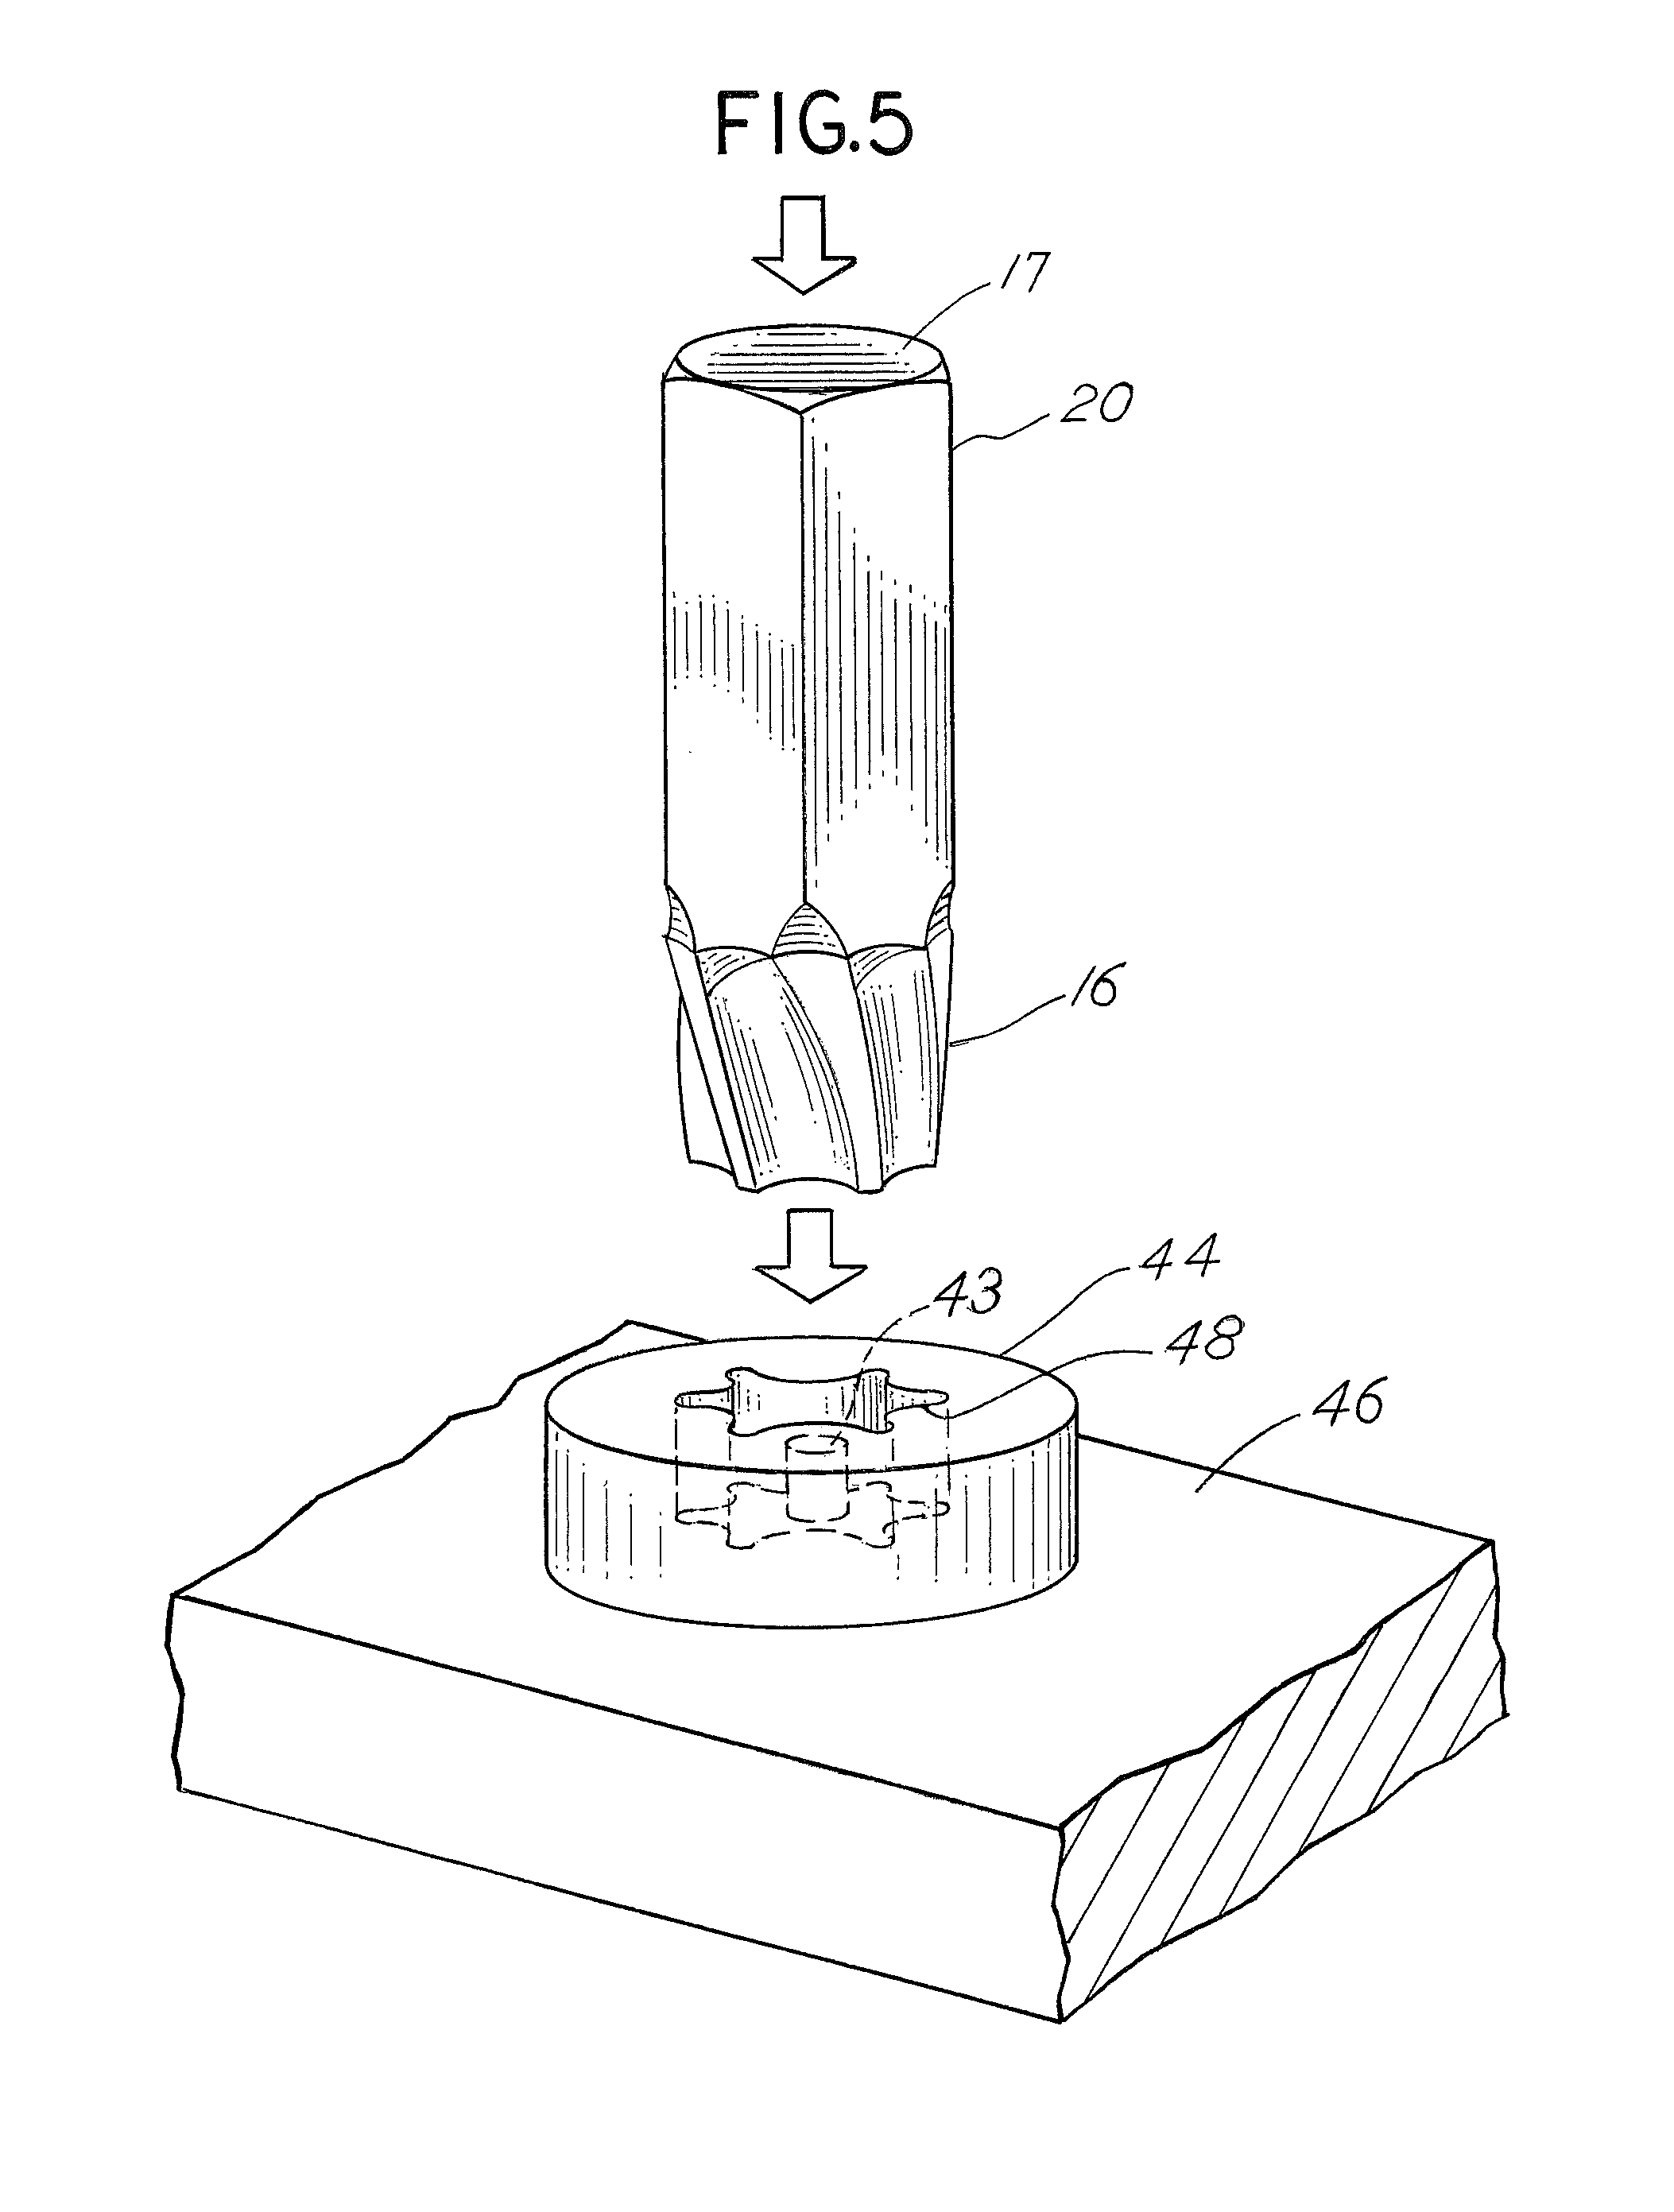 Extractor tool and extractor tool kit